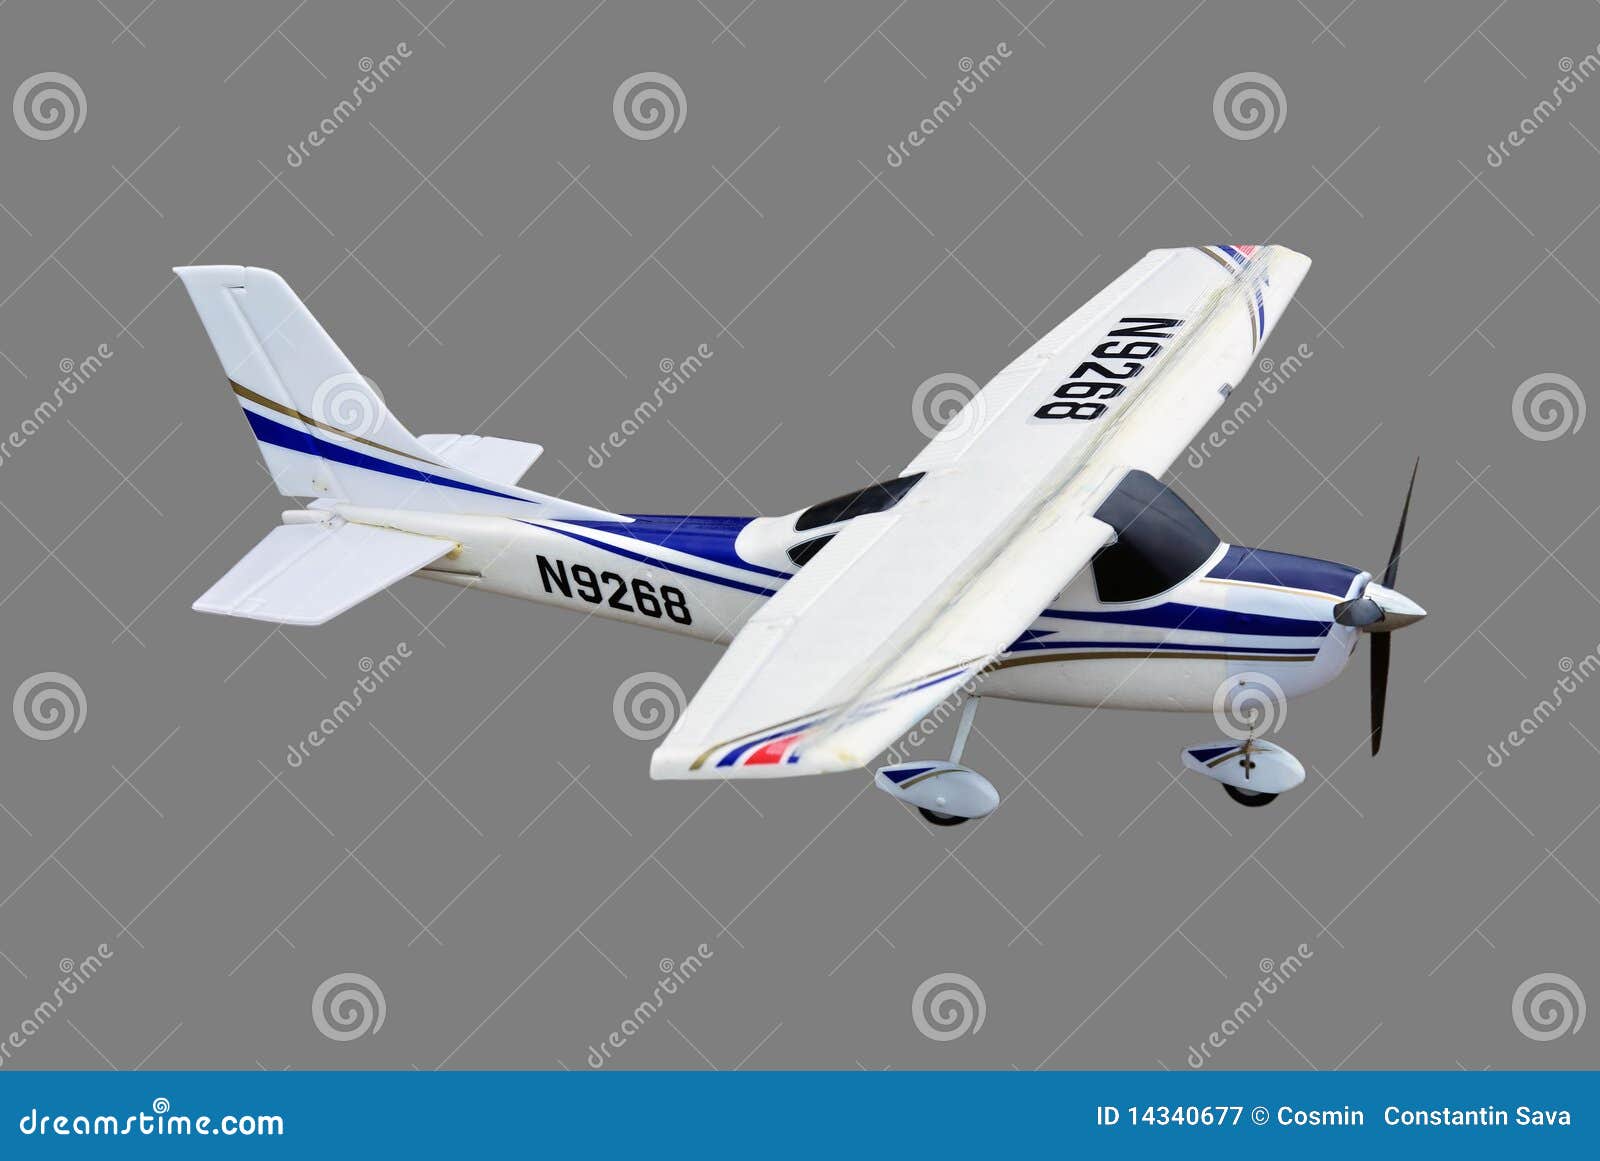 3d Radio Controlled Helicopter Model Stock Photography ...